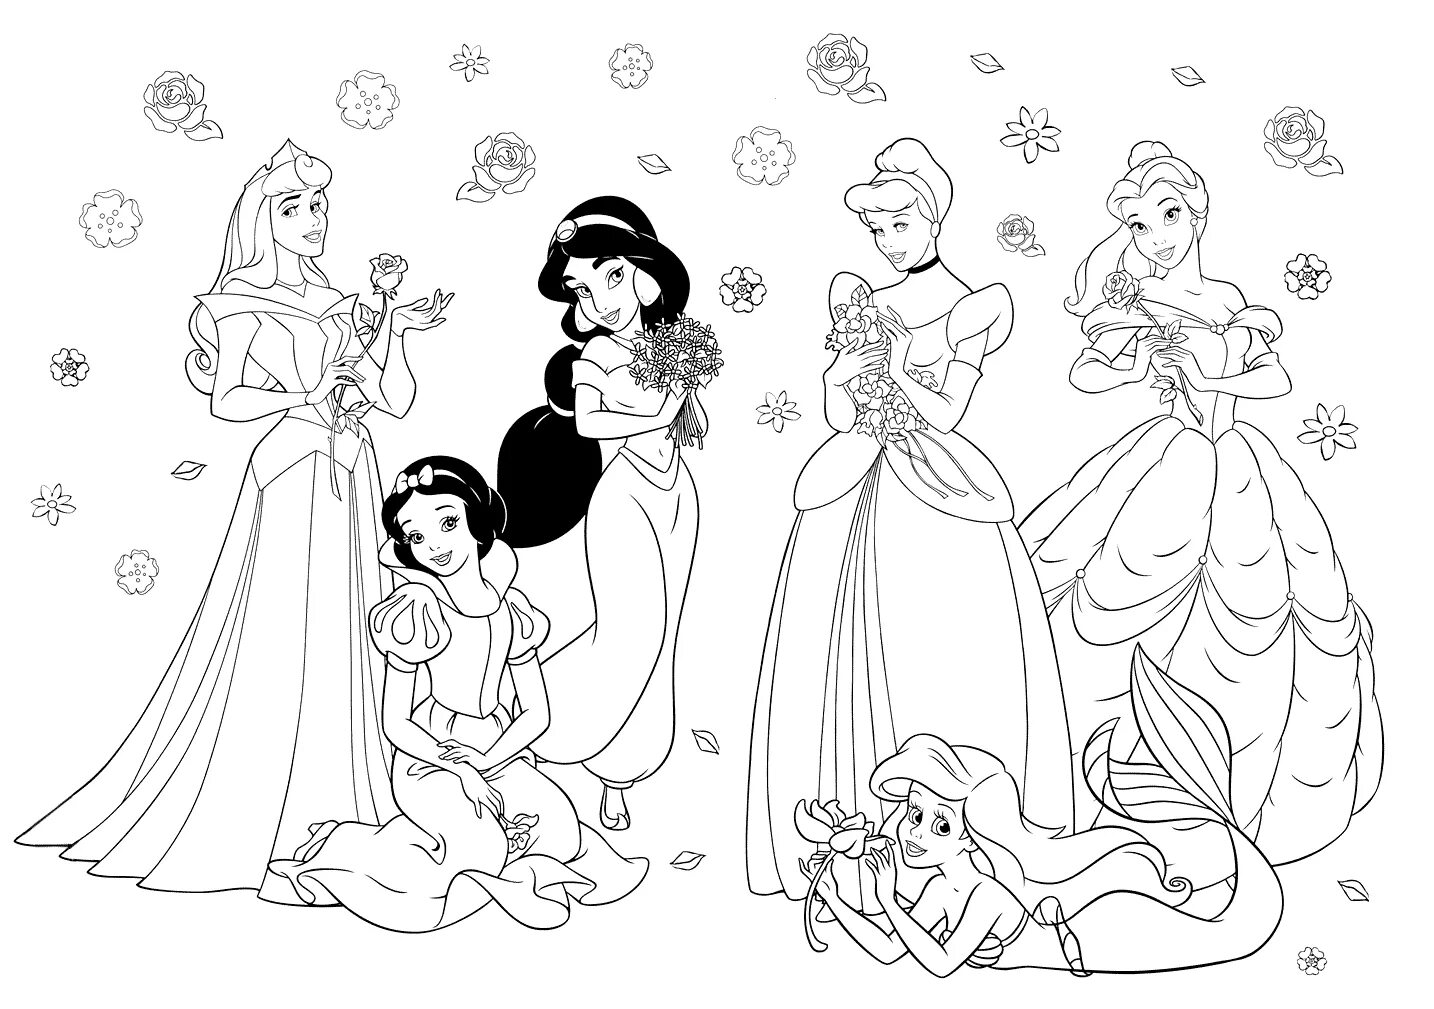 Fancy princess coloring pages for girls 7 years old